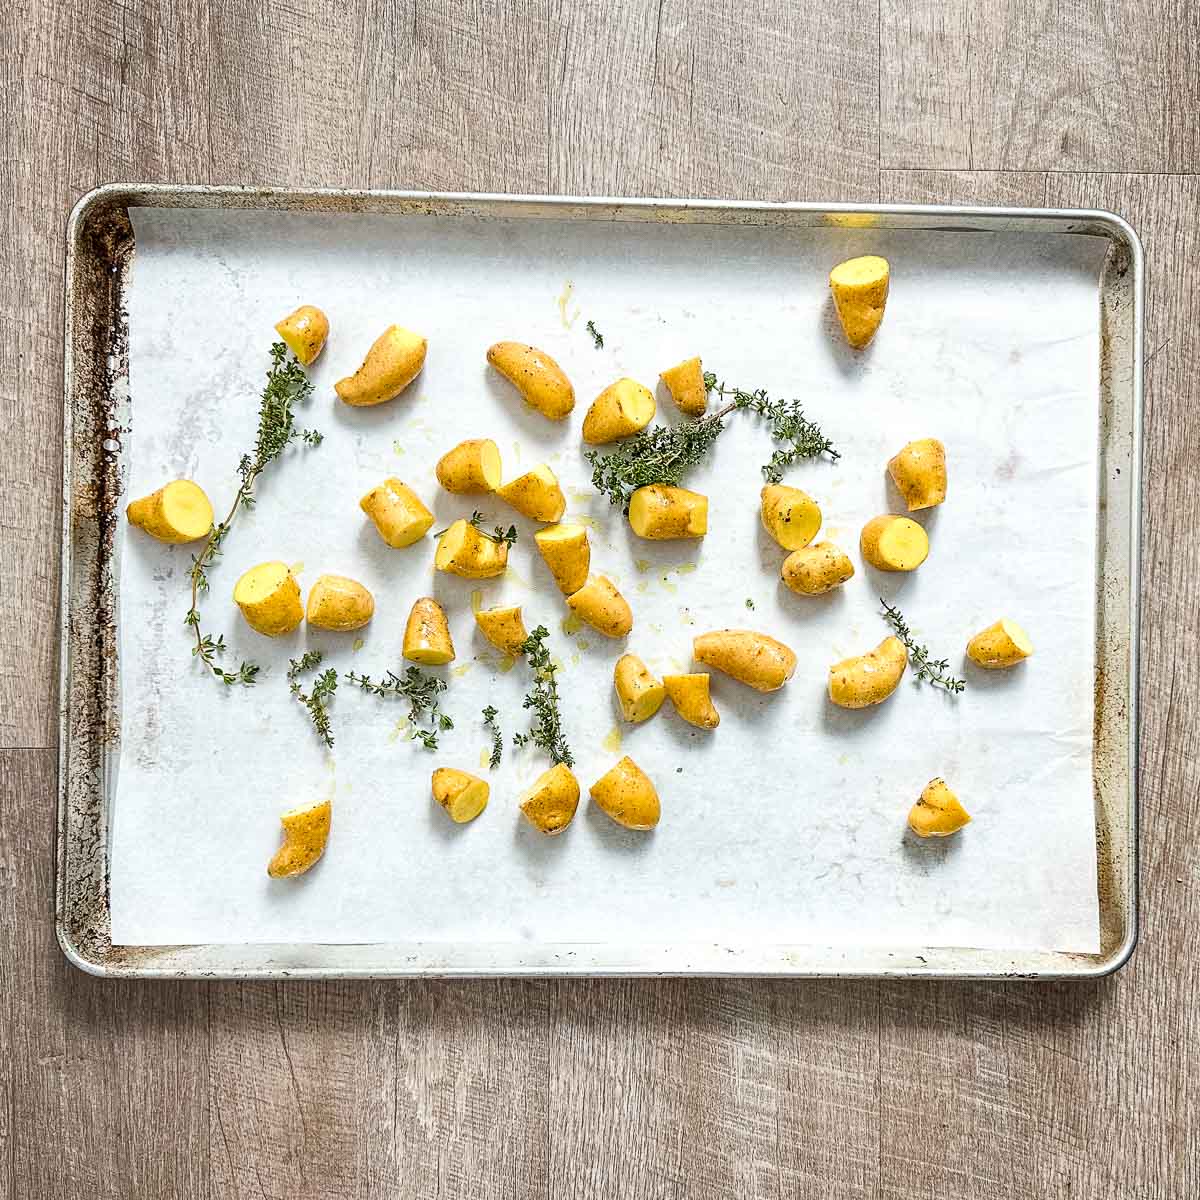 Halved fingerling potatoes and thyme sprigs on a sheet tray.